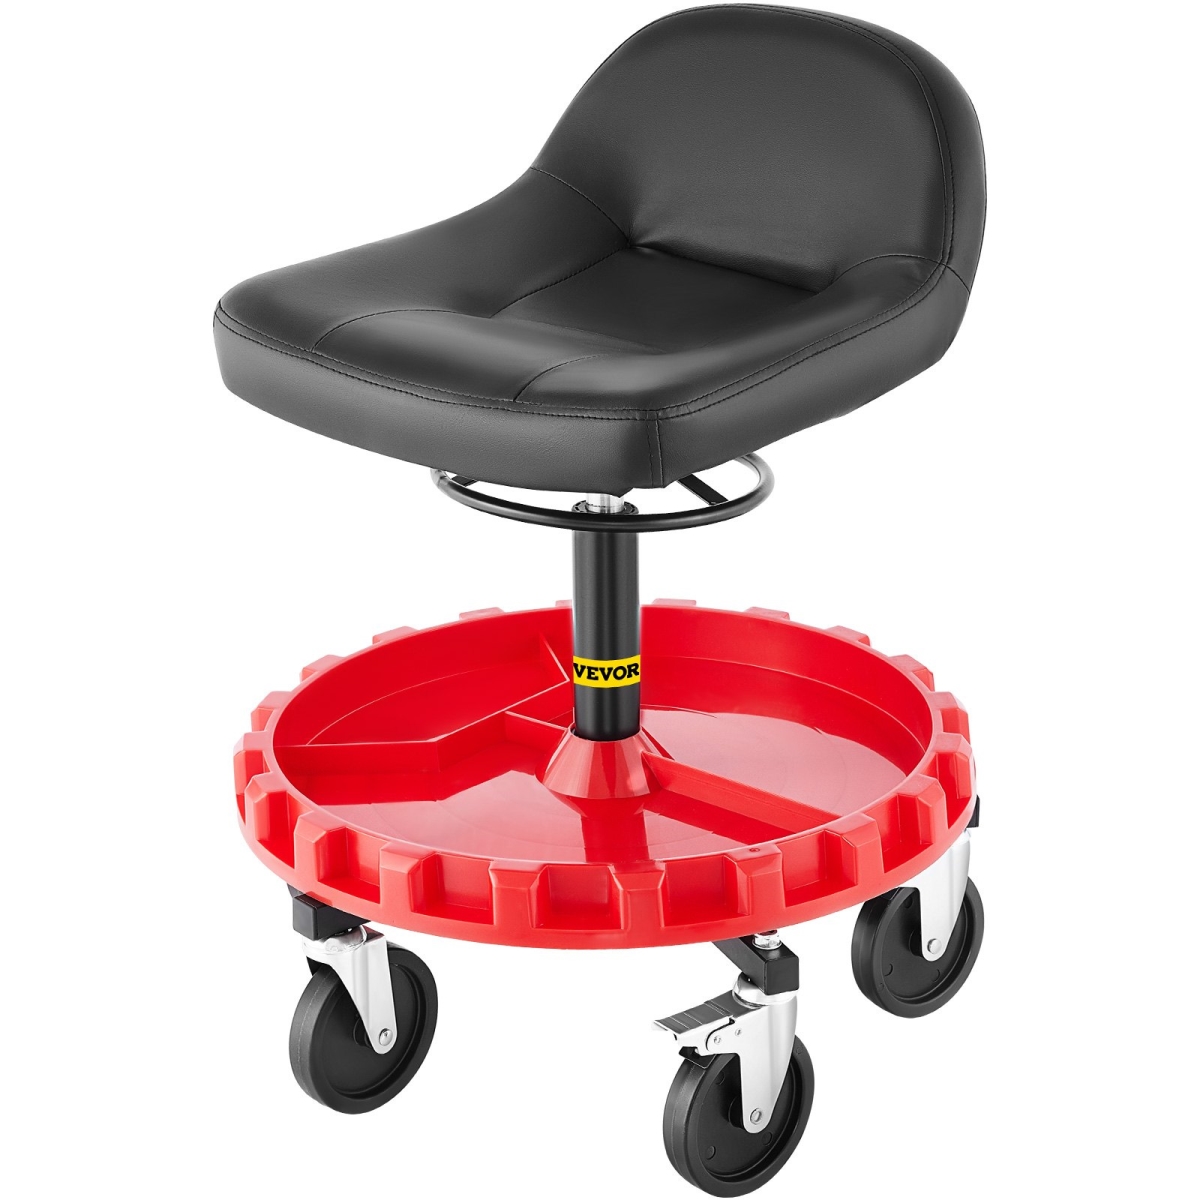 Picture of Vevor YXAPDSFZDQCDJEZCNV0 300 lbs Rolling Garage Stool